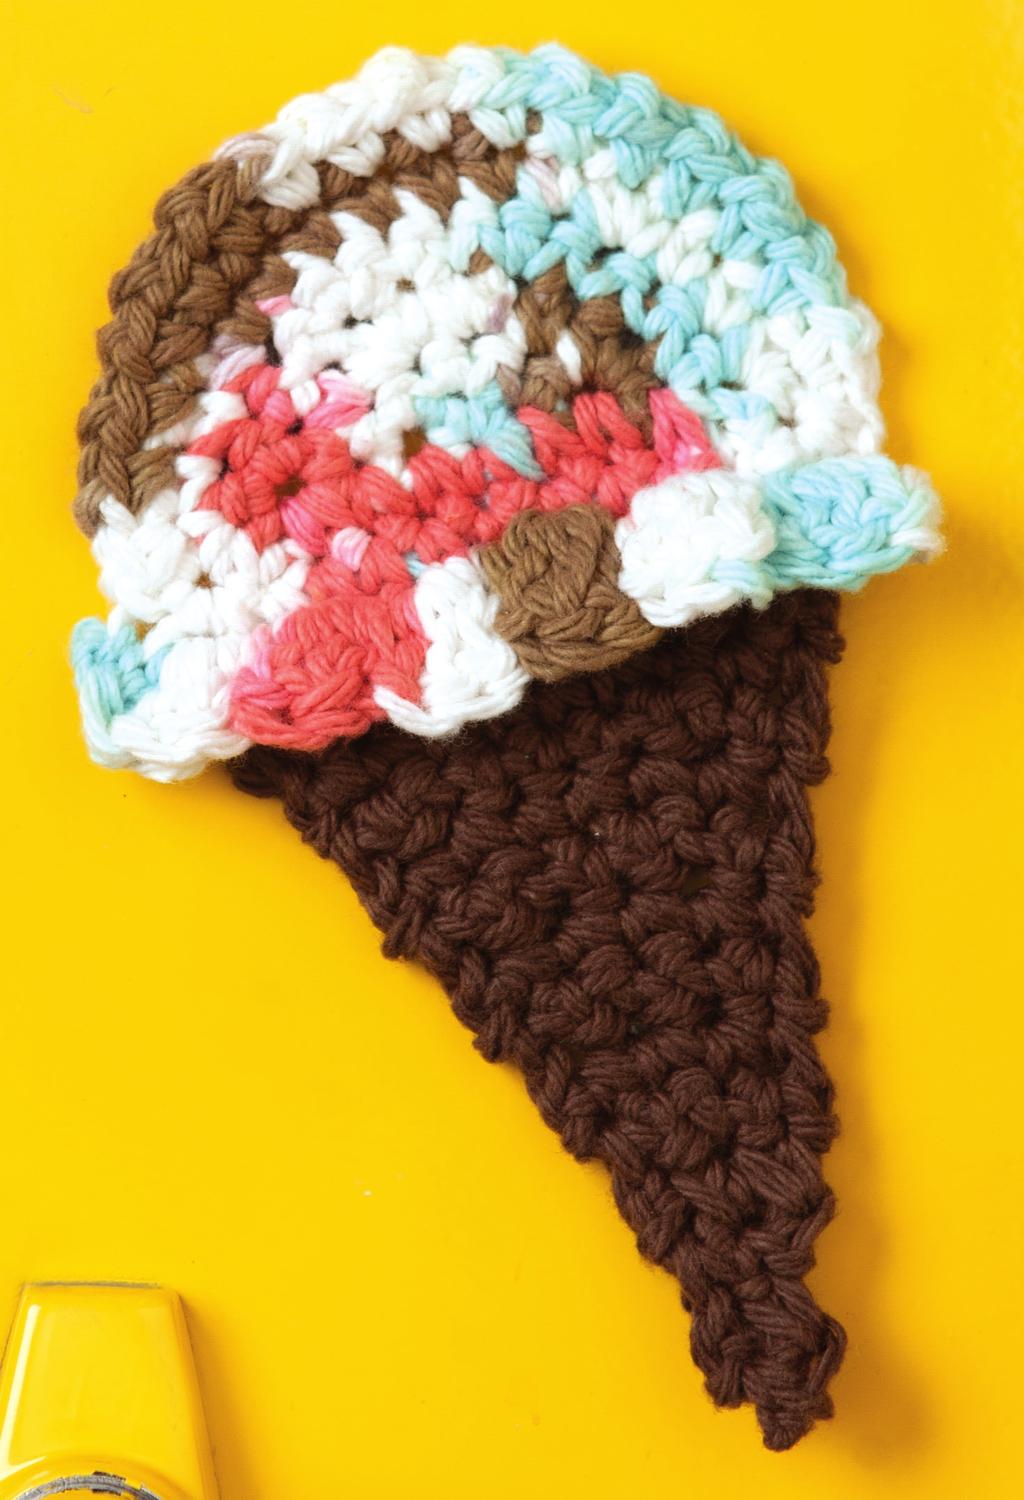 ICE CREAM MAGNET Finished Size: Approximately 4¼" wide x 6¼" high (11 cm x 16 cm) SHOPPING LIST Yarn (Medium Weight) Variegated - 13